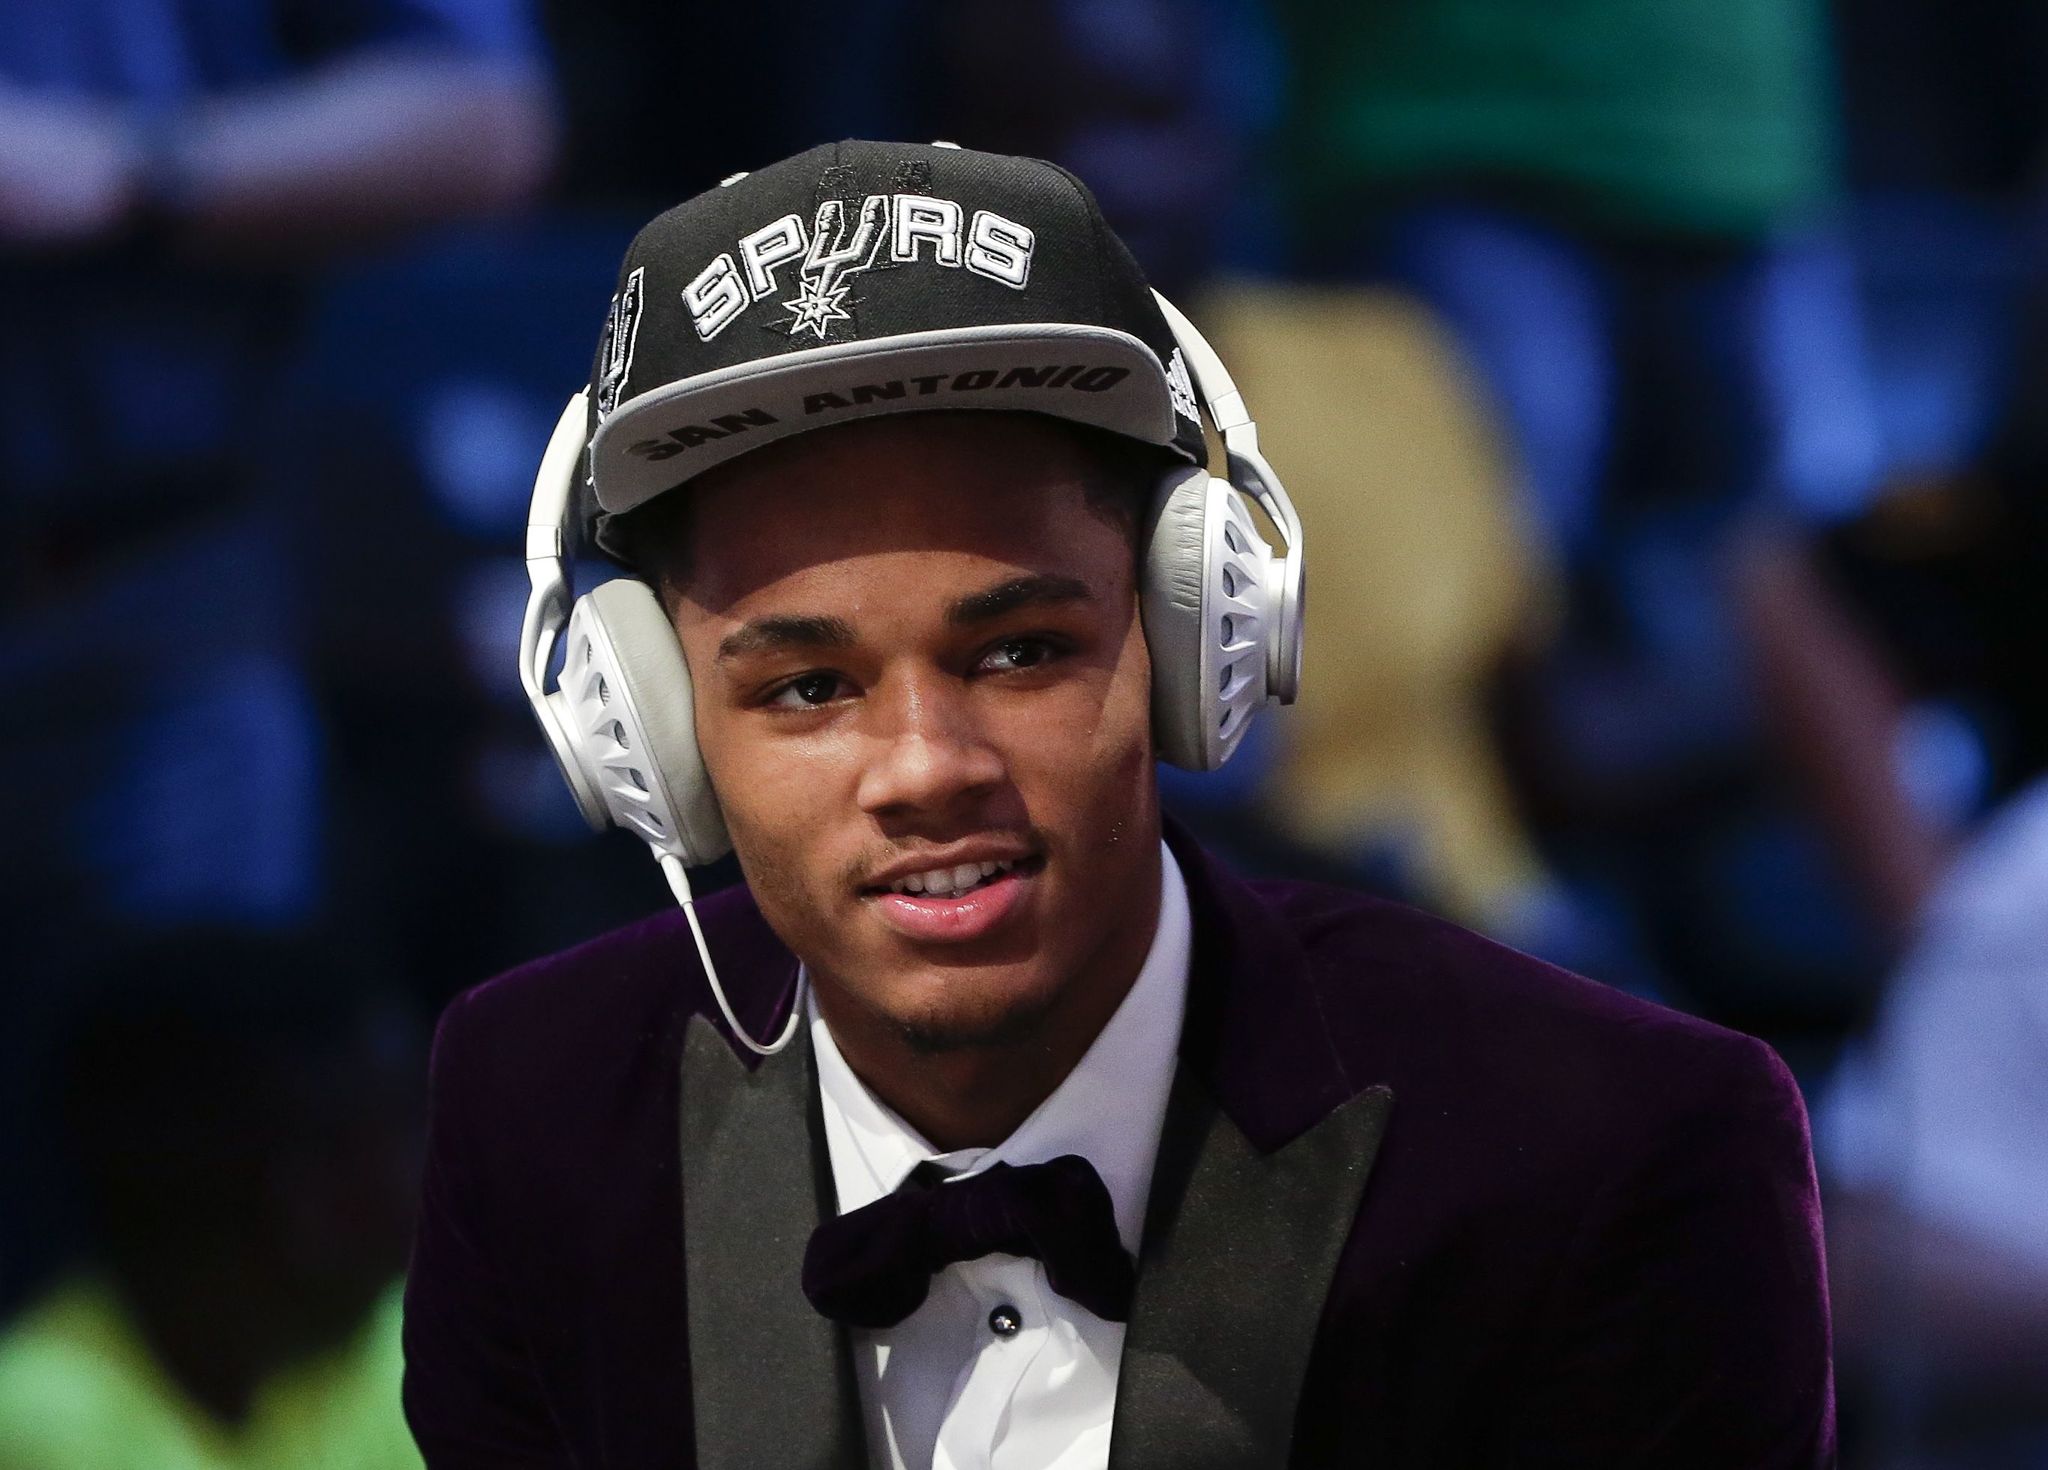 Dejounte Murray answers questions after being selected 29th overall by the San Antonio Spurs on Thursday during the 2016 NBA.